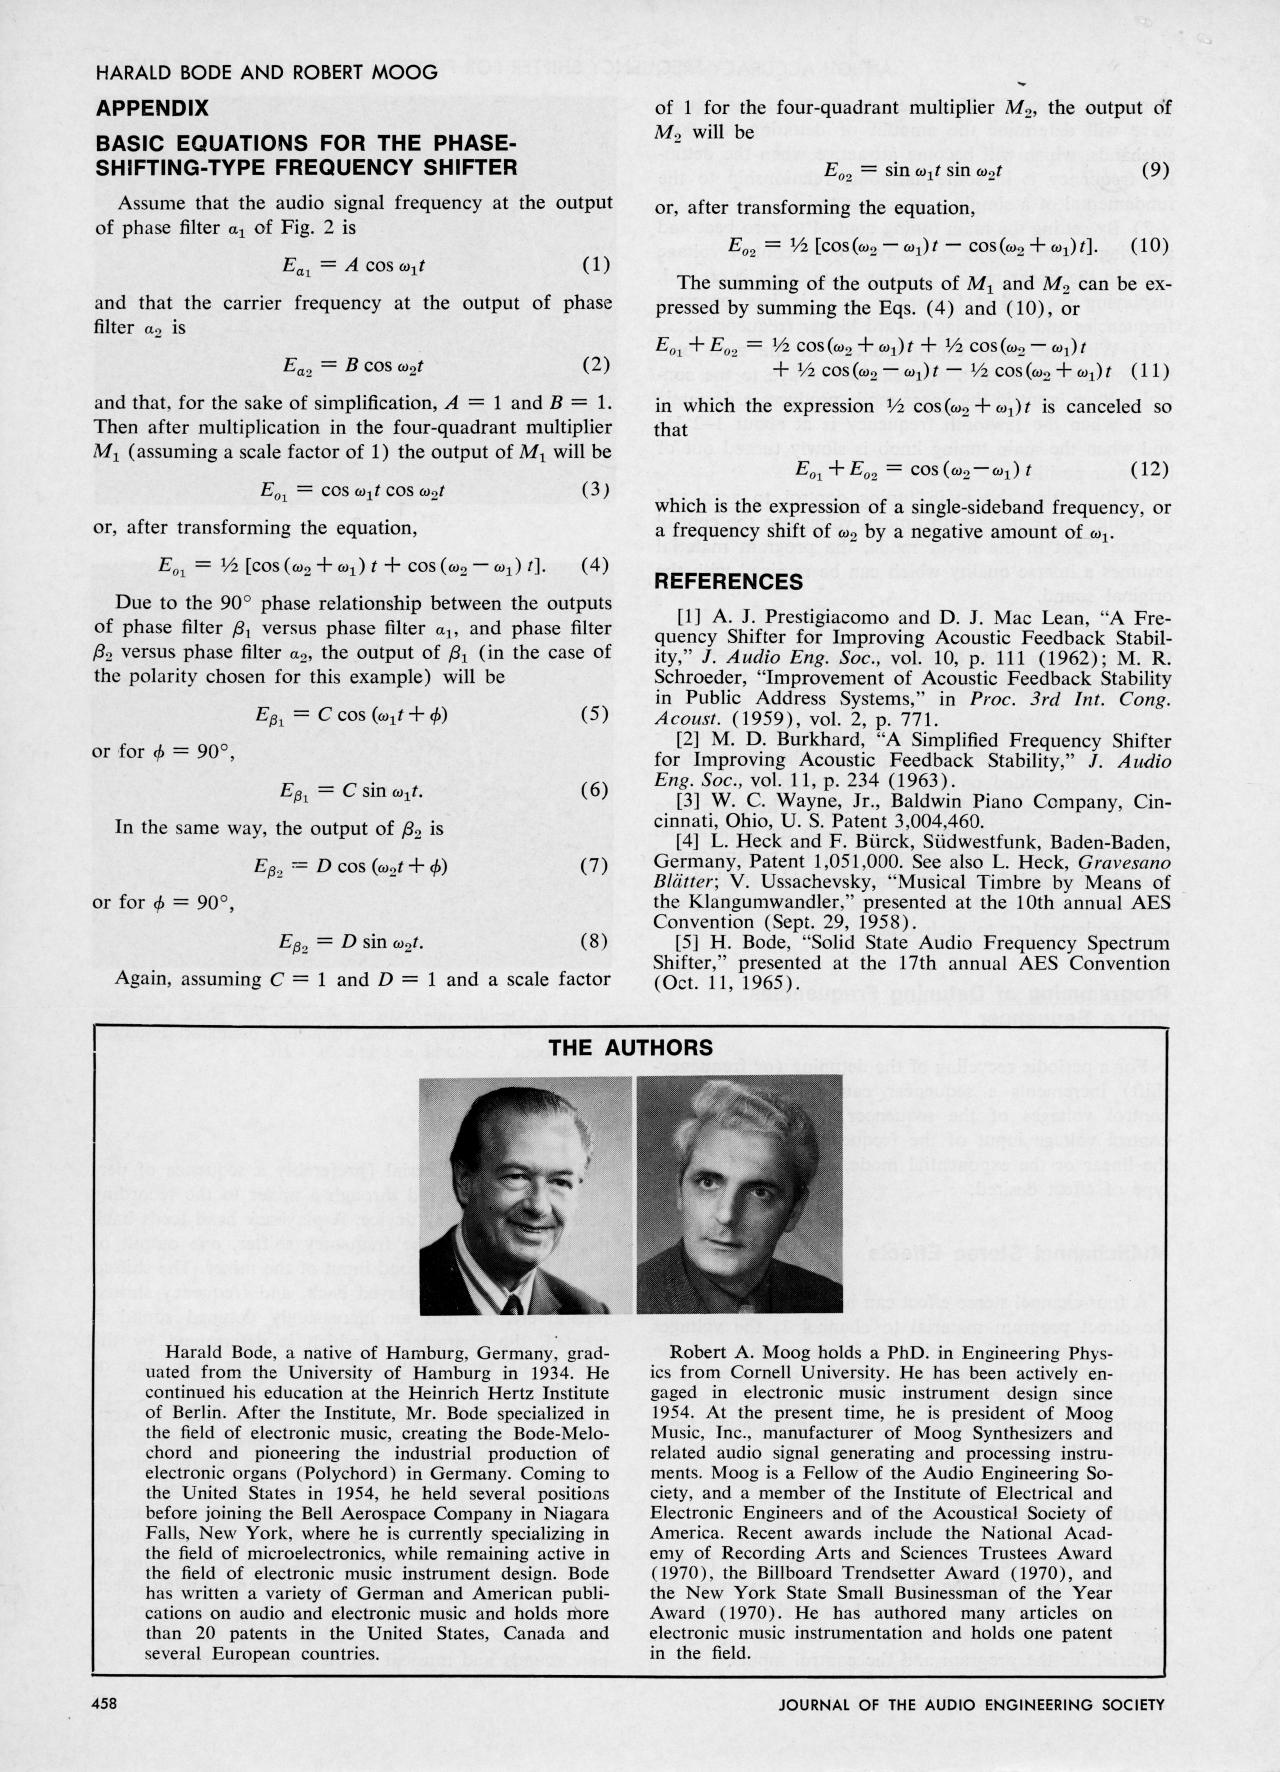 Harald Bode and Robert Moog: »A High-Accuracy Frequency Shifter for Professinal audio Applications« (1972)